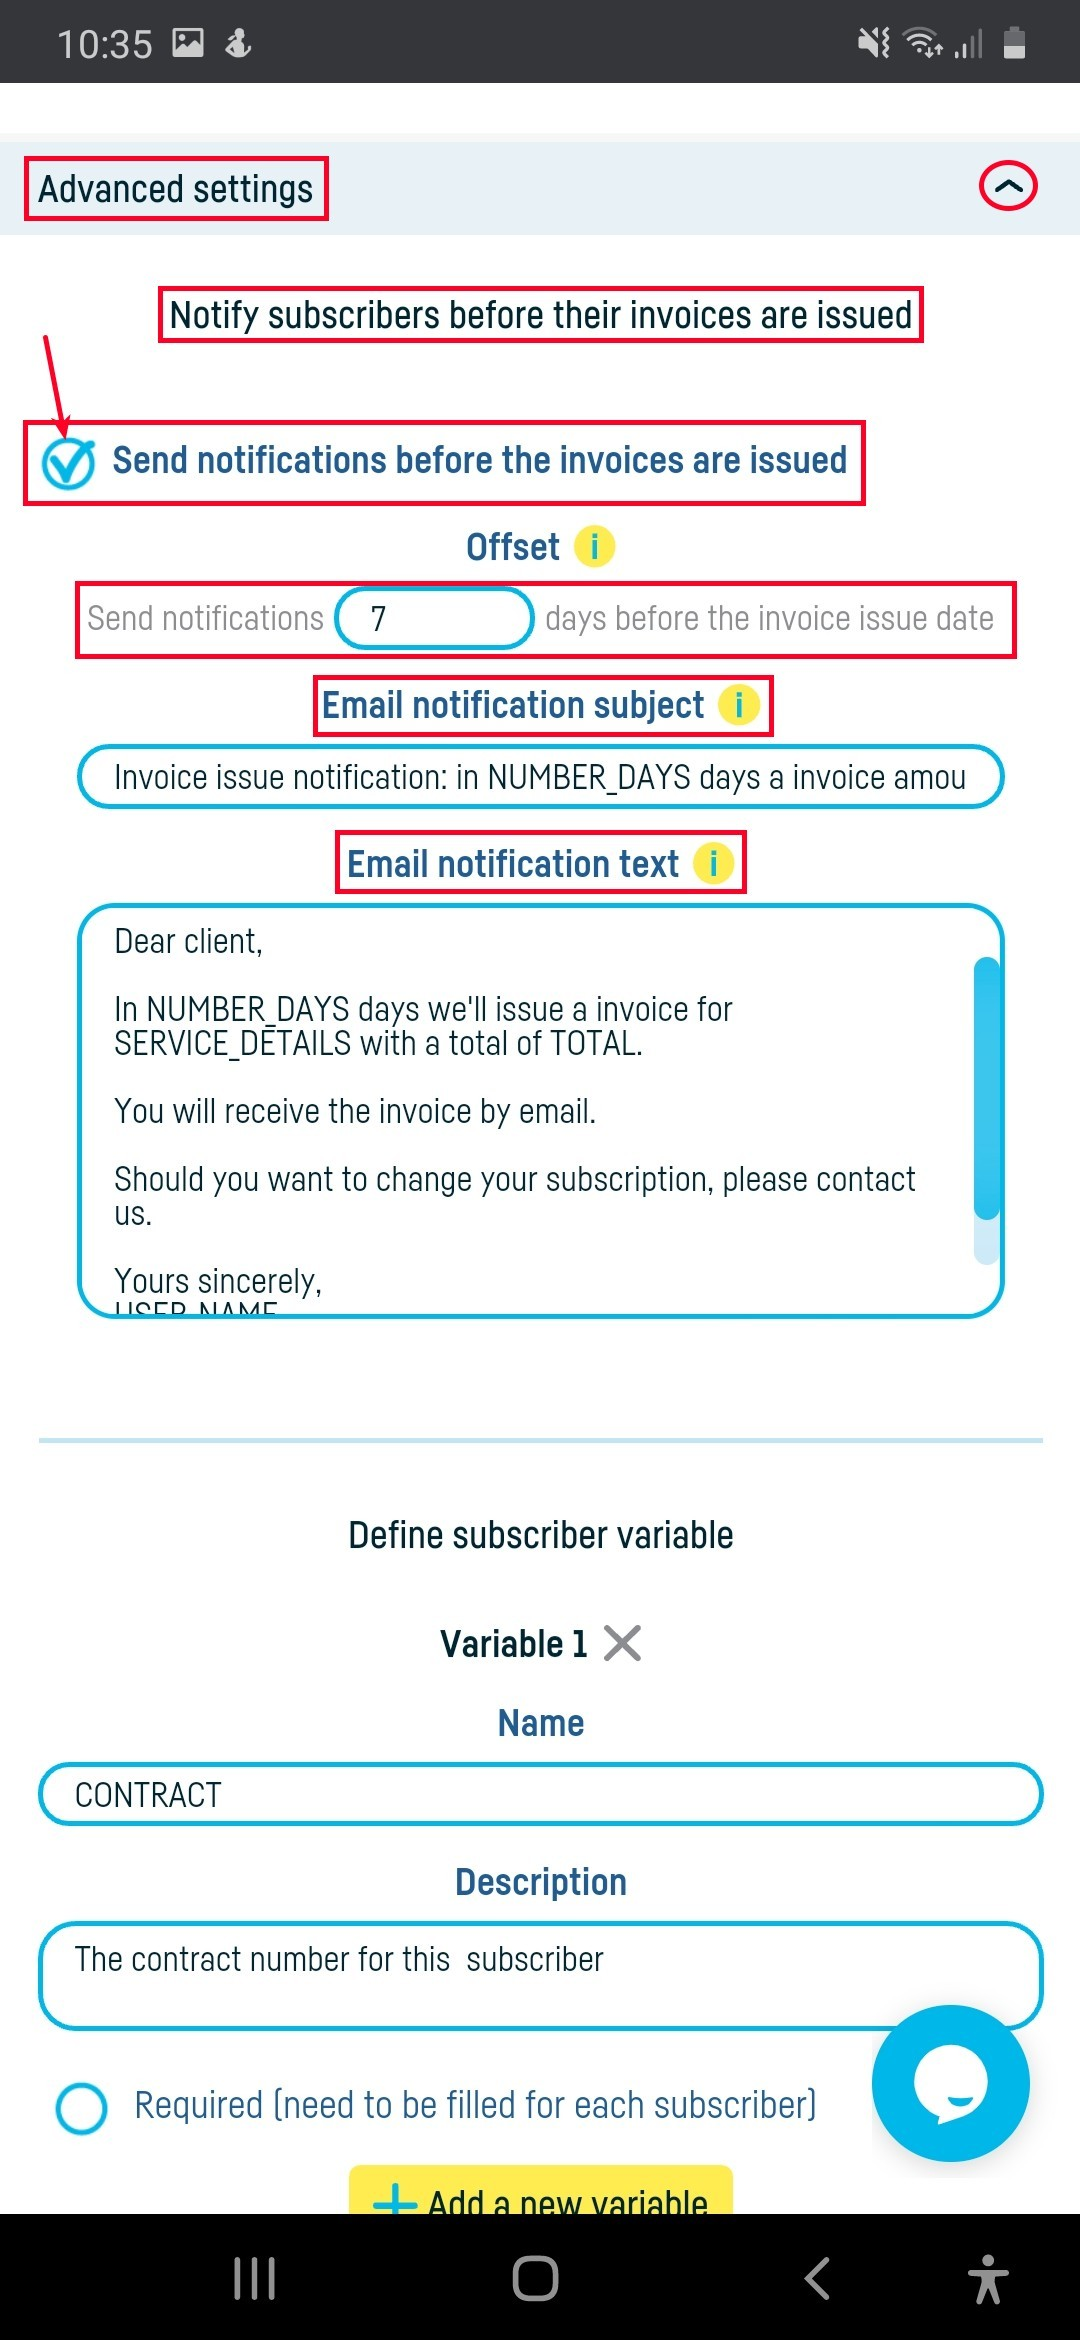 Notify subscribers before their invoices are issued - step 2